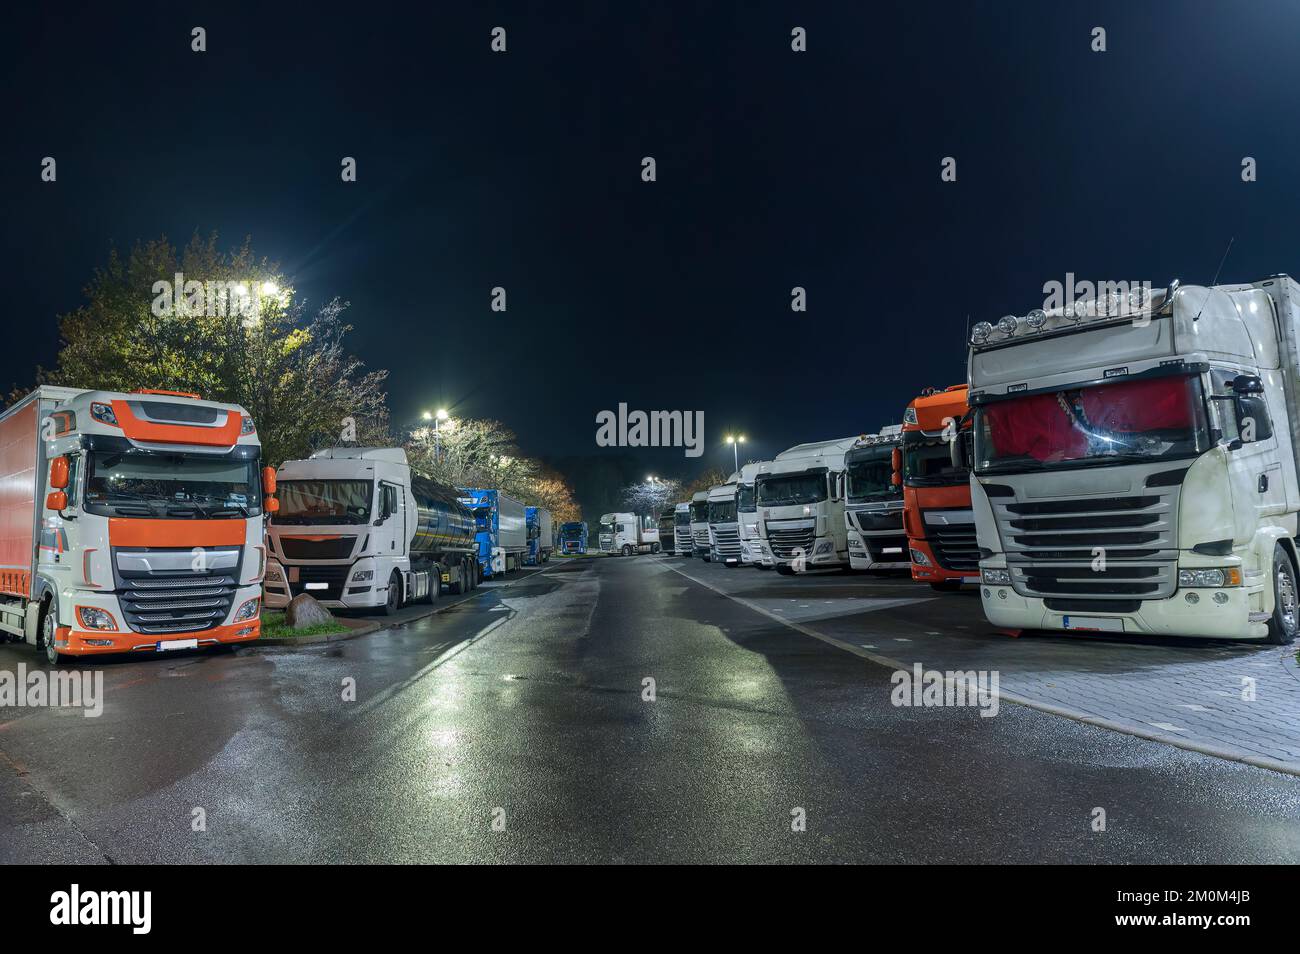 Everyday life on German motorway car parks, too few spaces for the trucks, which therefore have to park partly on car parking spaces. Stock Photo